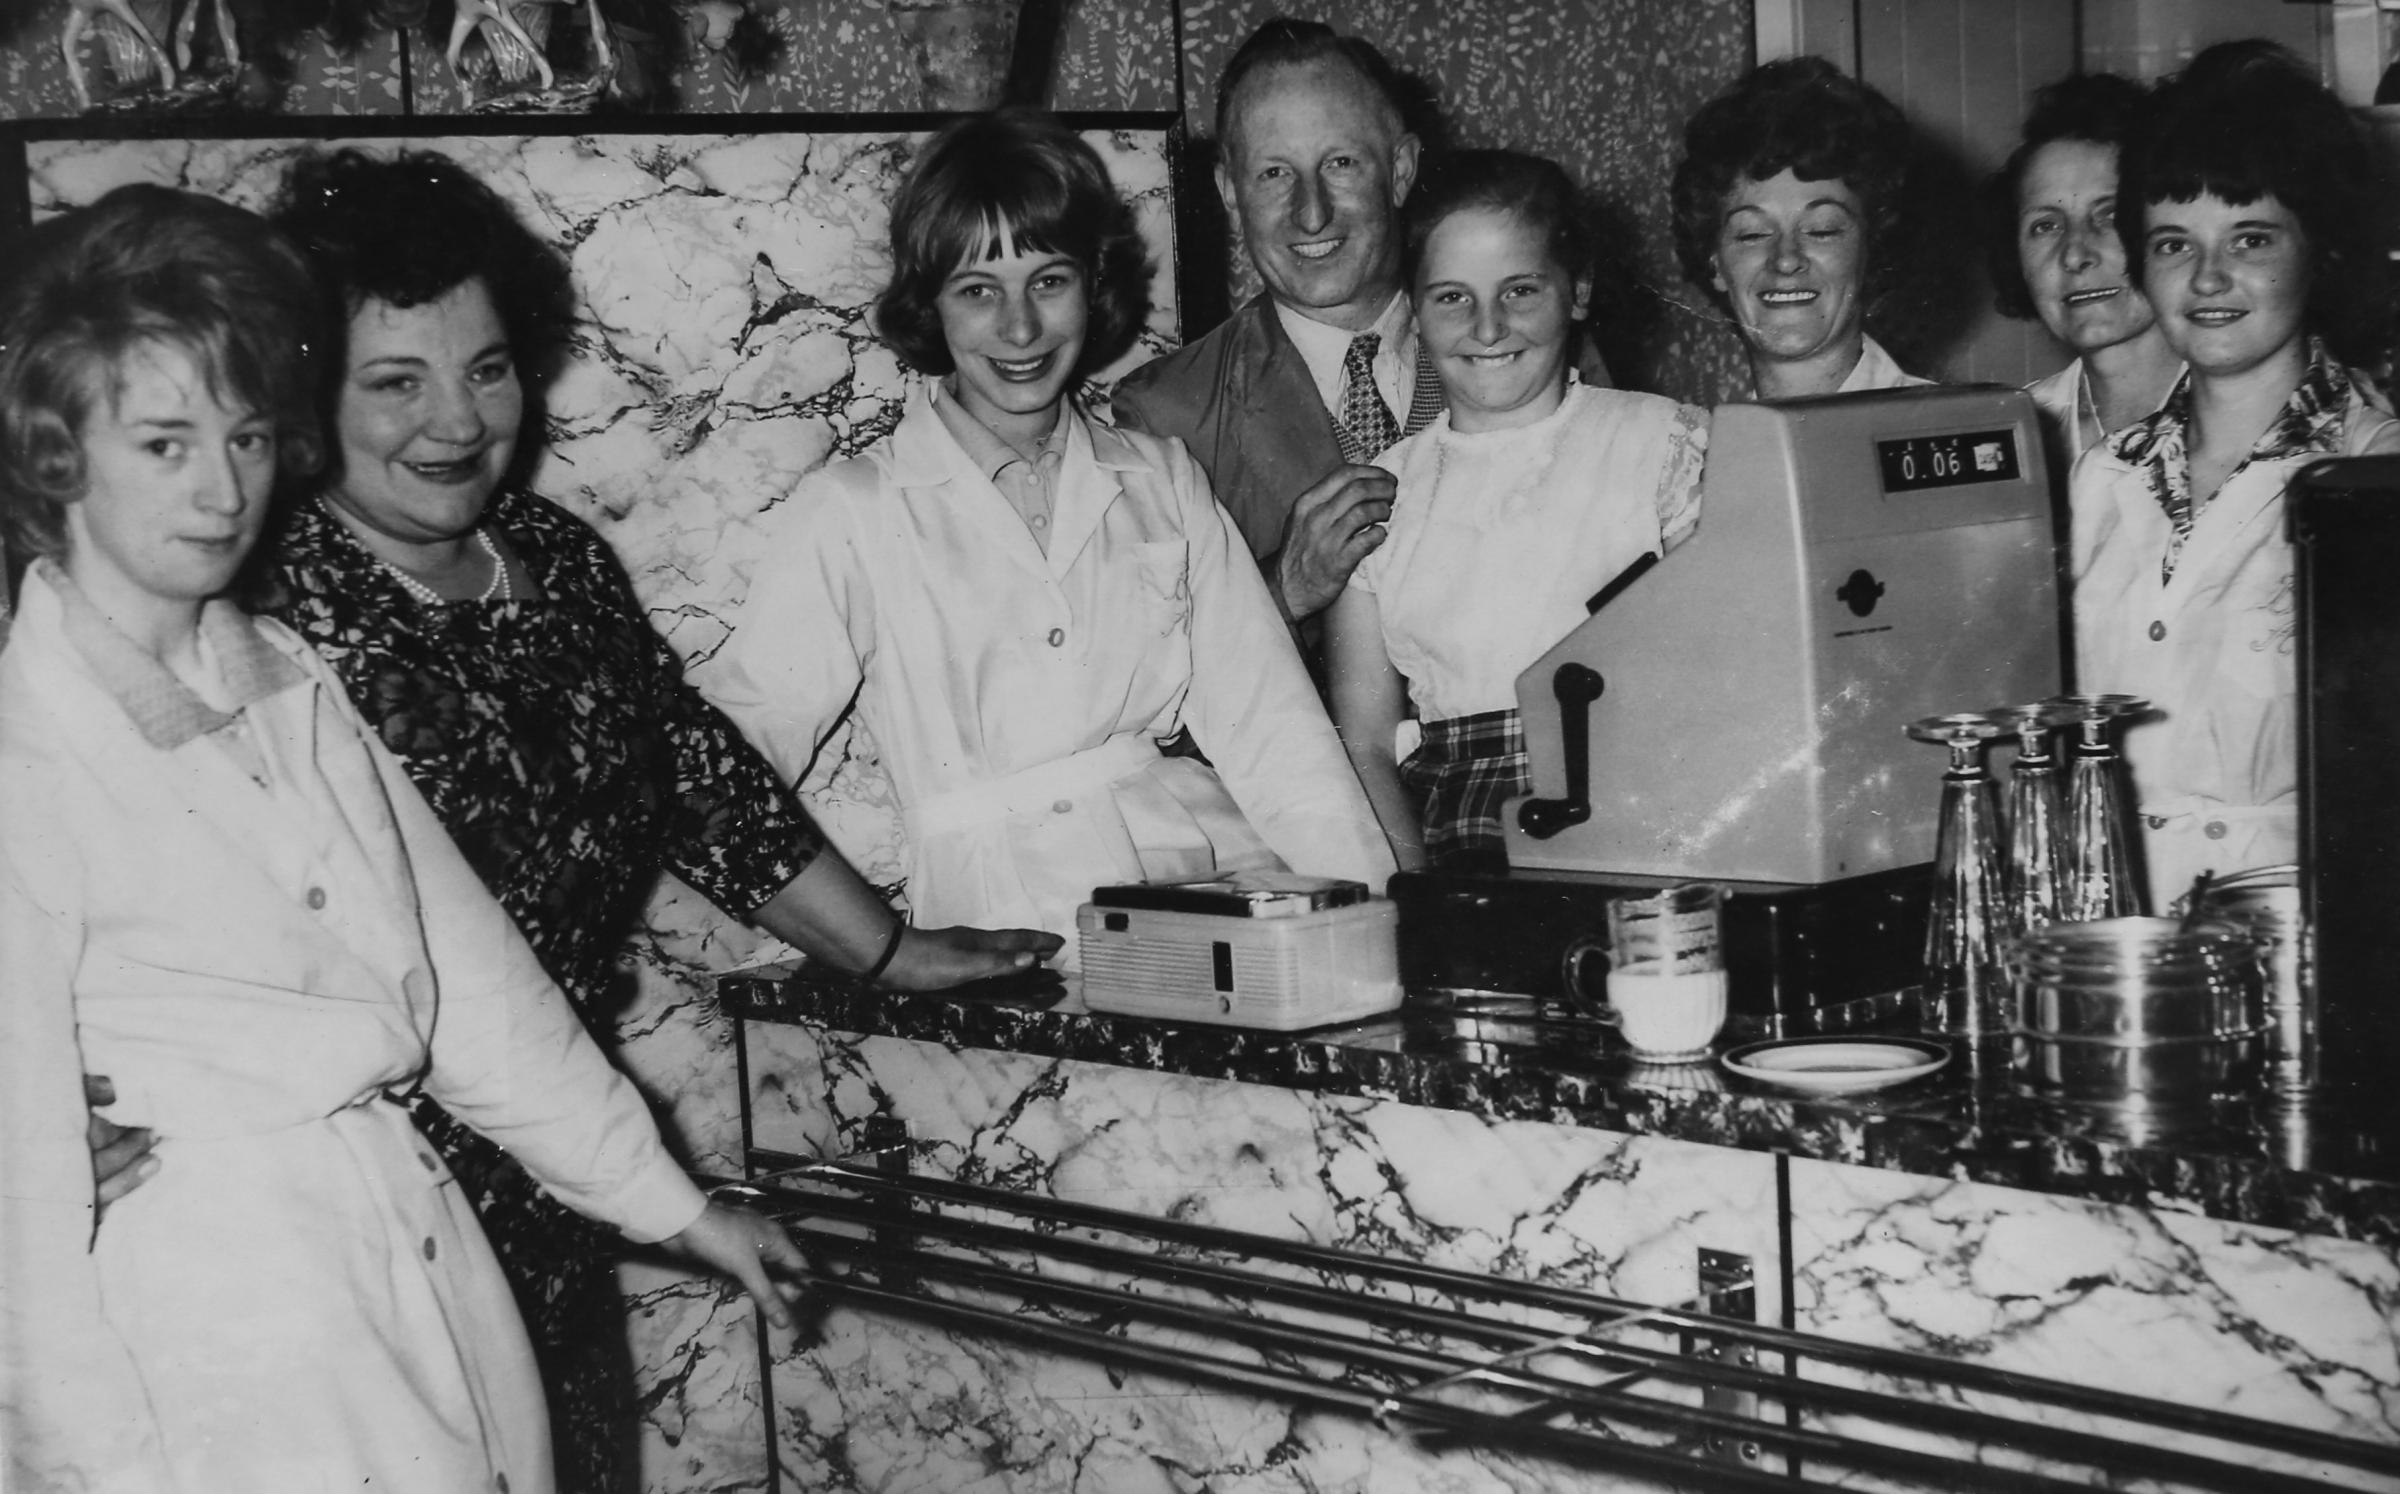 Copy of a photograph supplied by Lee Conetta, owner of Buon Appetito in Rutherglen showing her along with her sister and parents and staff members in the original Buon Appetito on the Main Street, Rutherglen in 1963. Pictured is Lee who is 3rd from left,